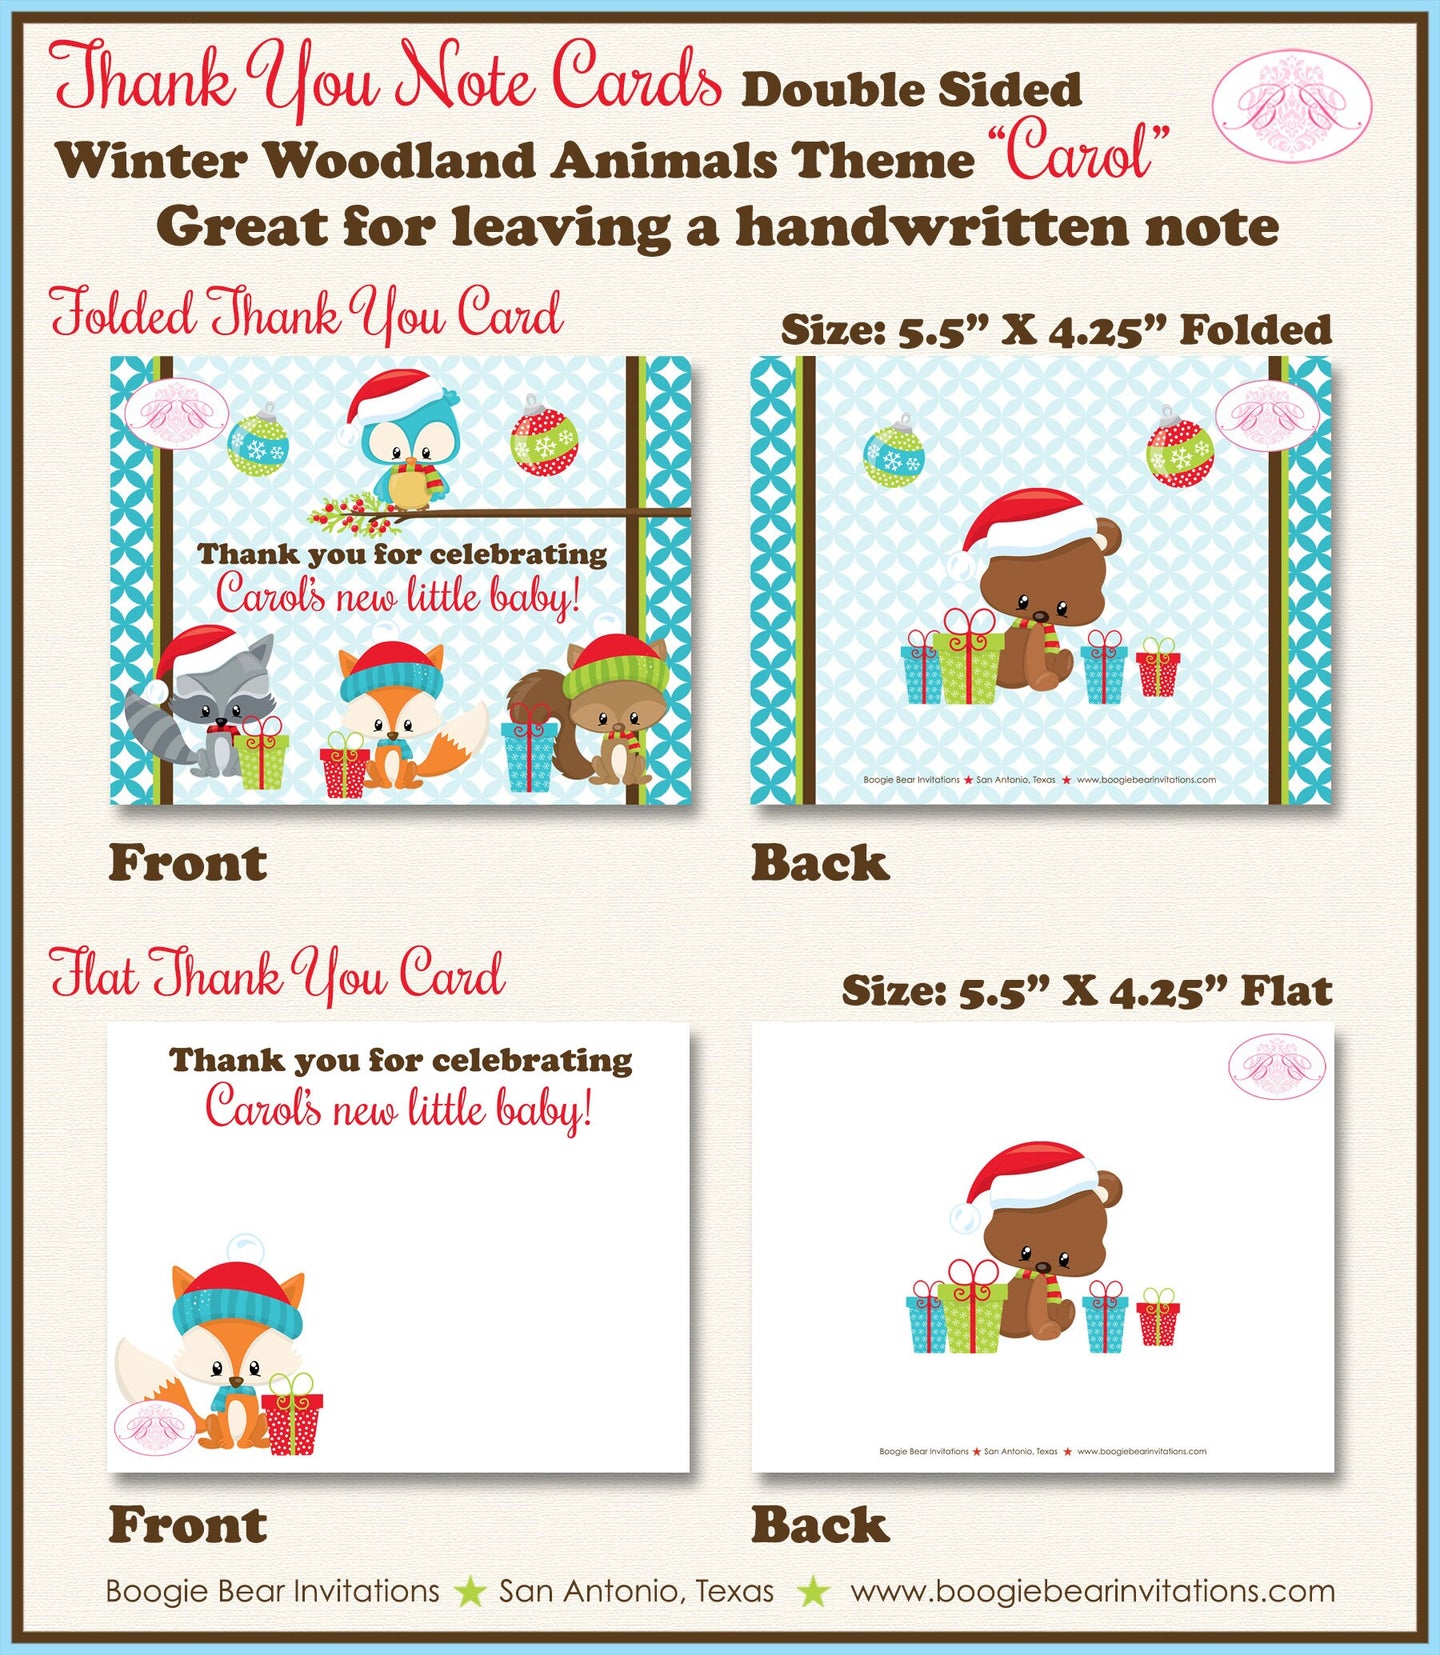 Winter Woodland Animals Party Thank You Card Note Christmas Baby Shower Owl Squirrel Fox Forest Boogie Bear Invitations Carol Theme Printed